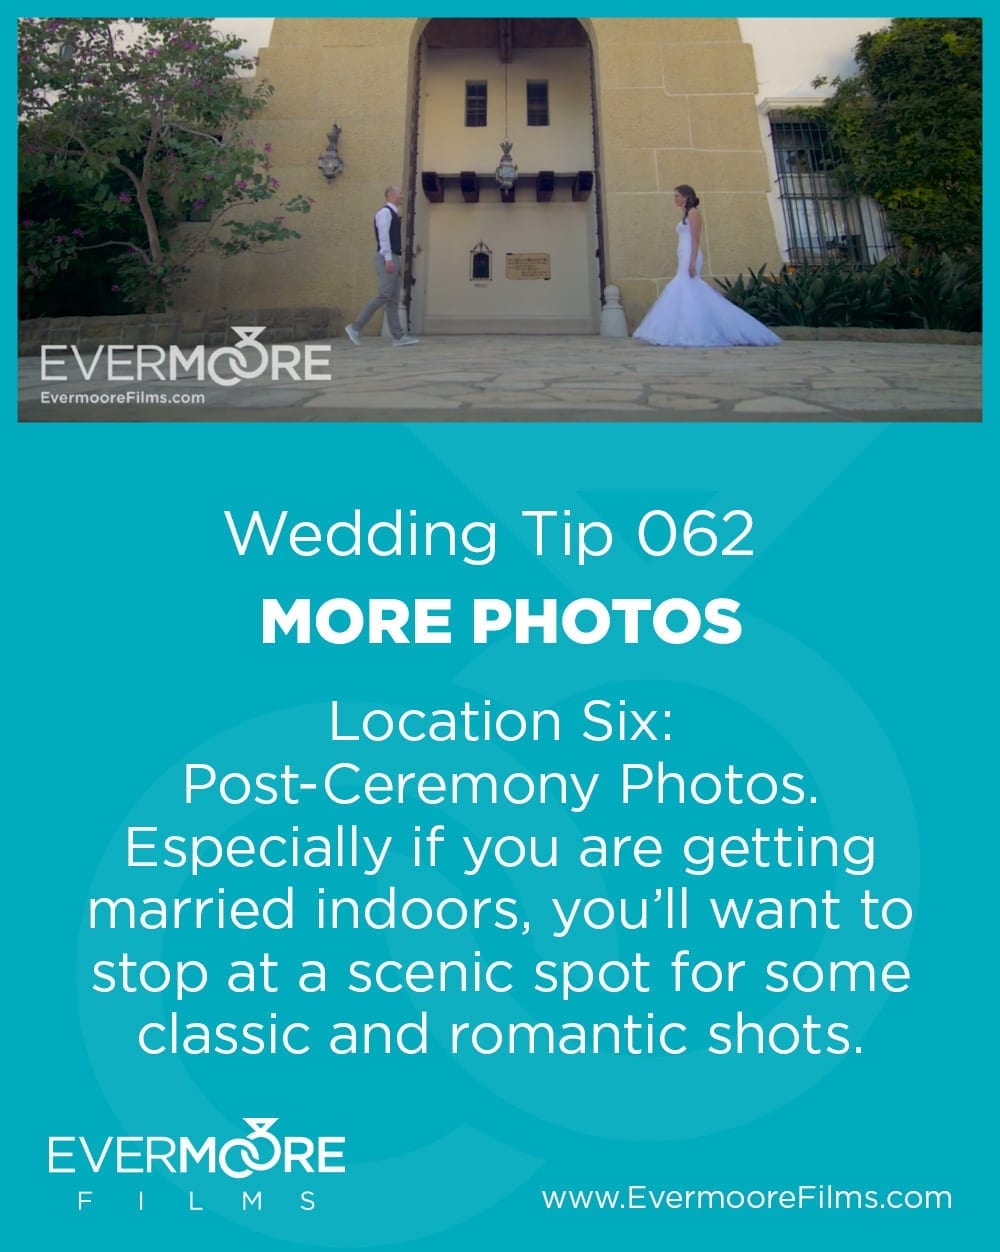 More Photos | Wedding Tip 062 | Evermoore Films | Location Six: Post-Ceremony Photos. Especially if you are getting married indoors, you'll want to stop at a scenic spot for some classic and romantic shots.